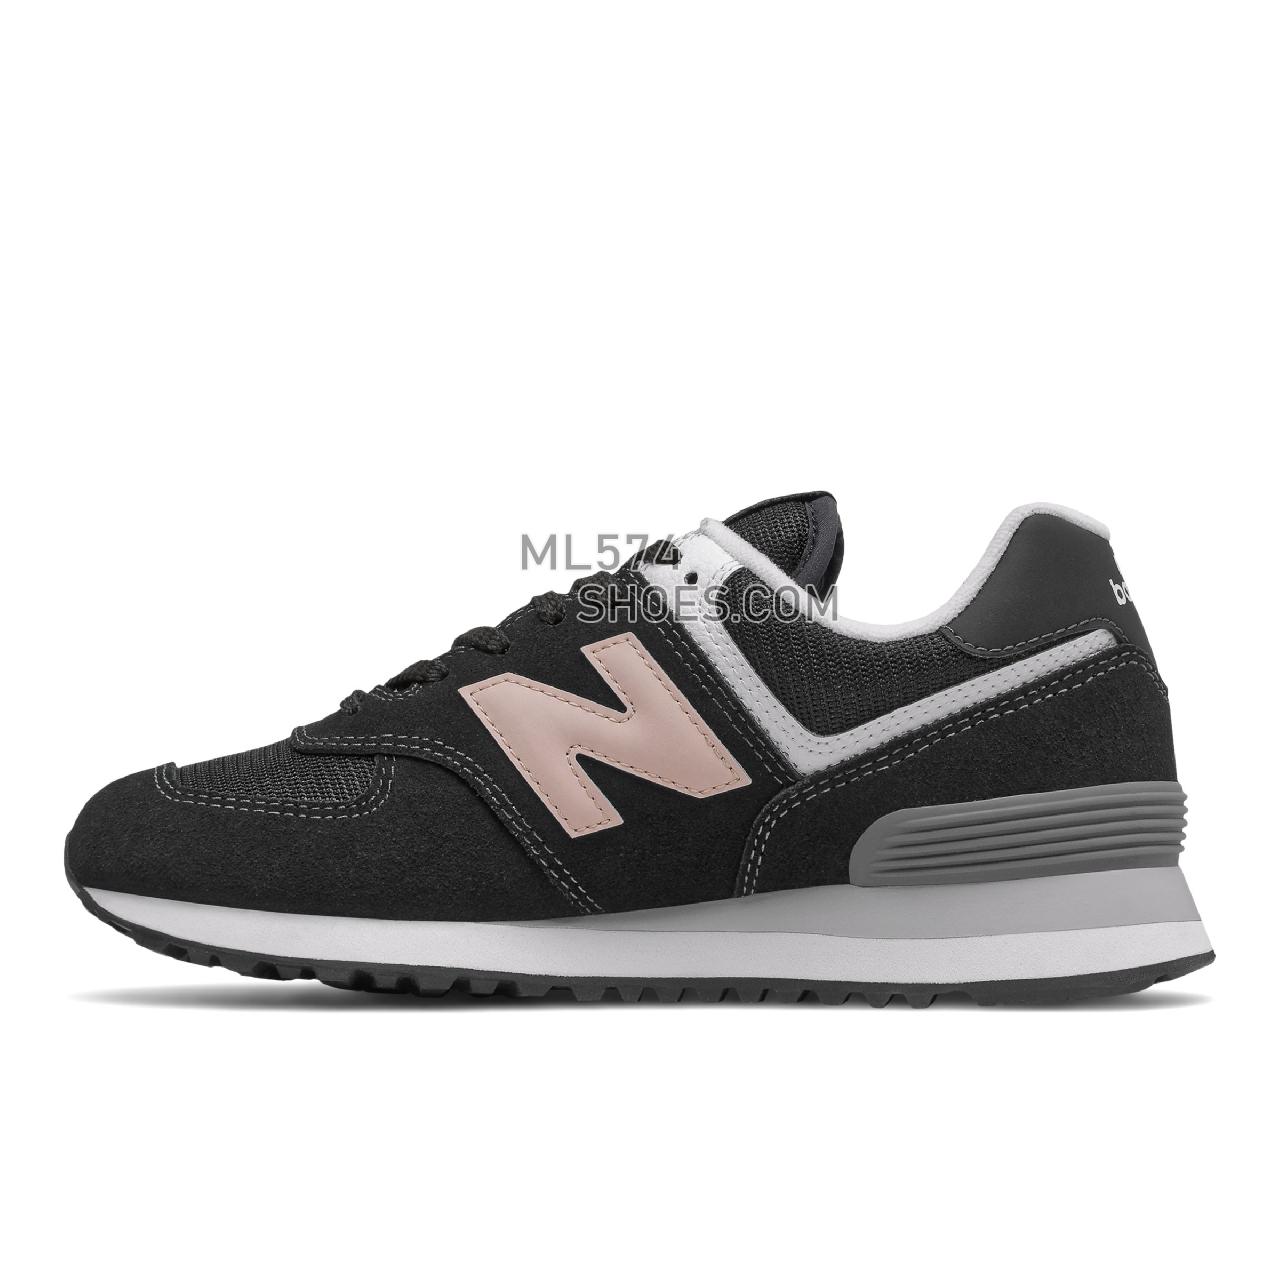 New Balance 574 - Women's Classic Sneakers - Black with Oyster Pink - WL574HB2